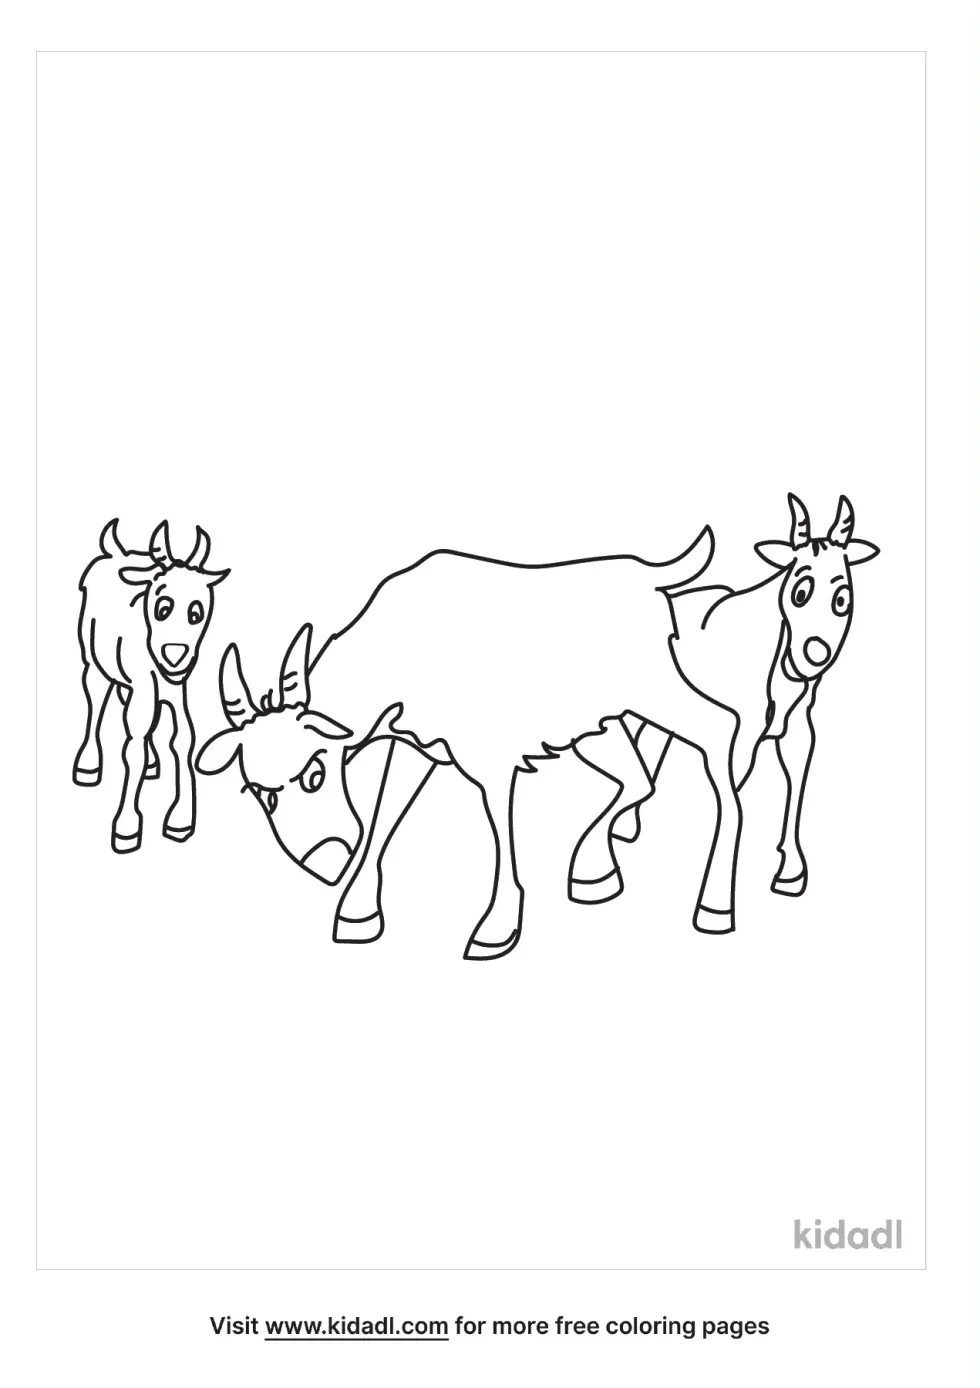 3 Billy Goats Gruff Coloring Page